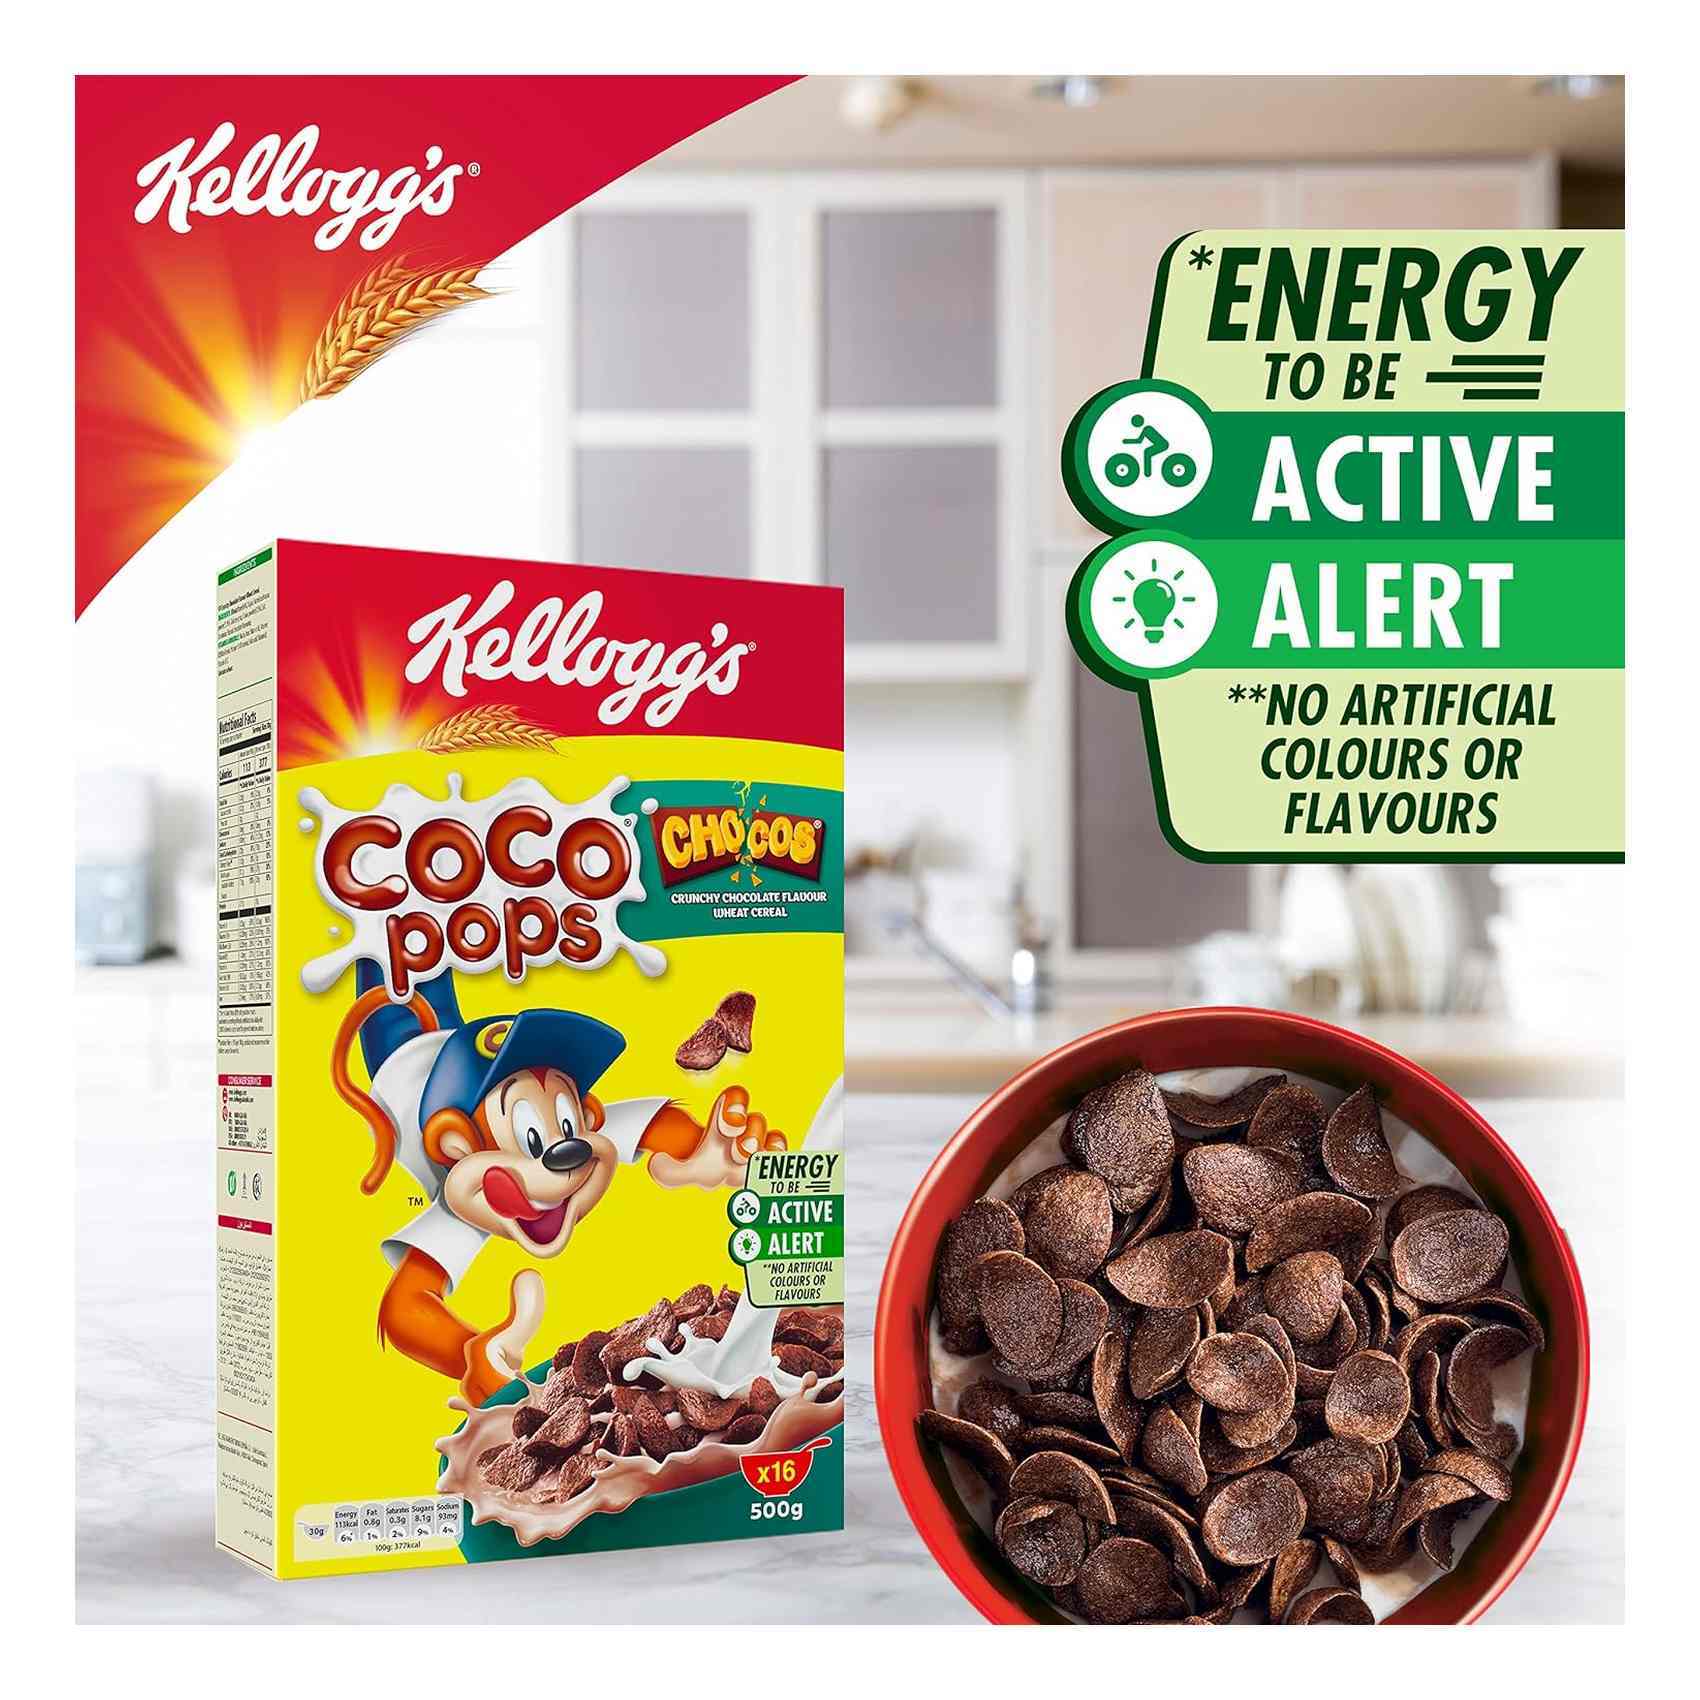 Home delivery of Chocapic chocolate cereal 430g